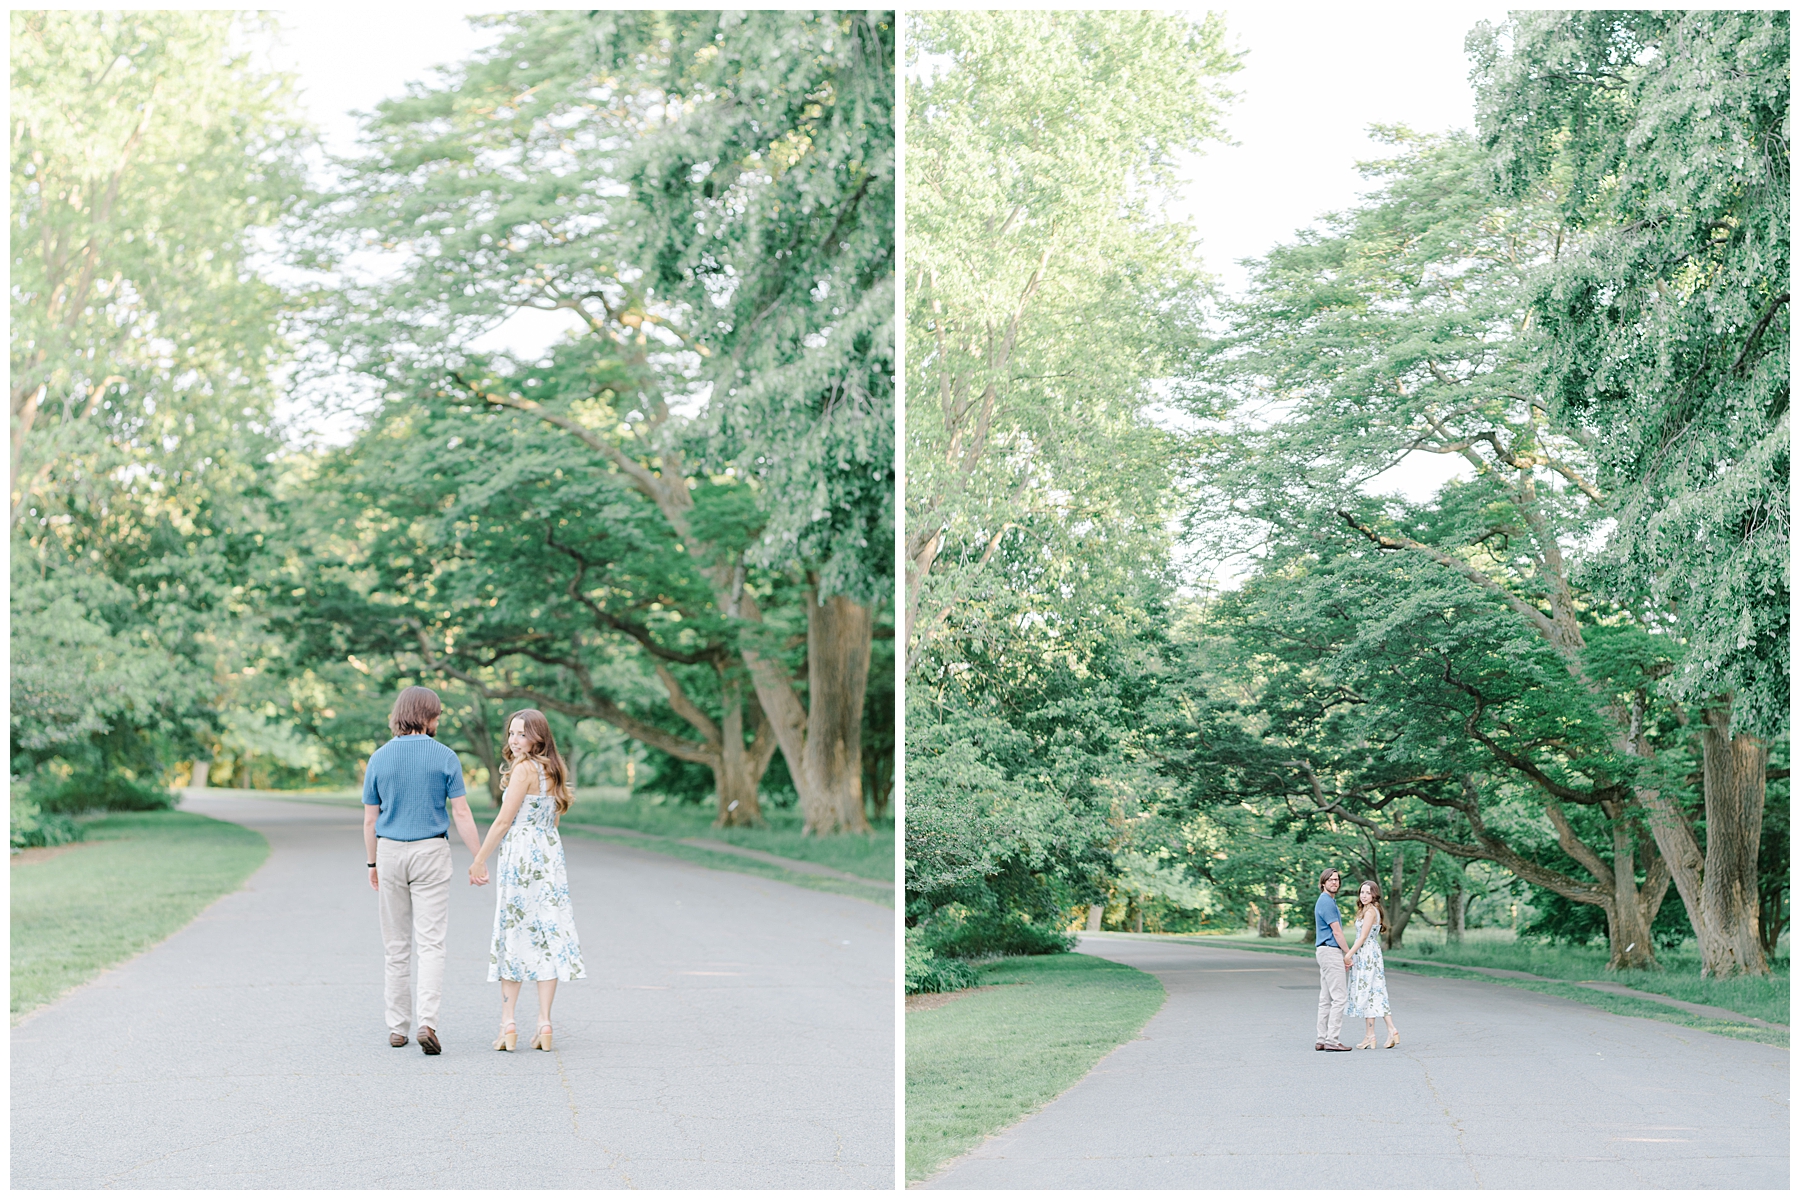 newly engaged couple walk together holding hands down path